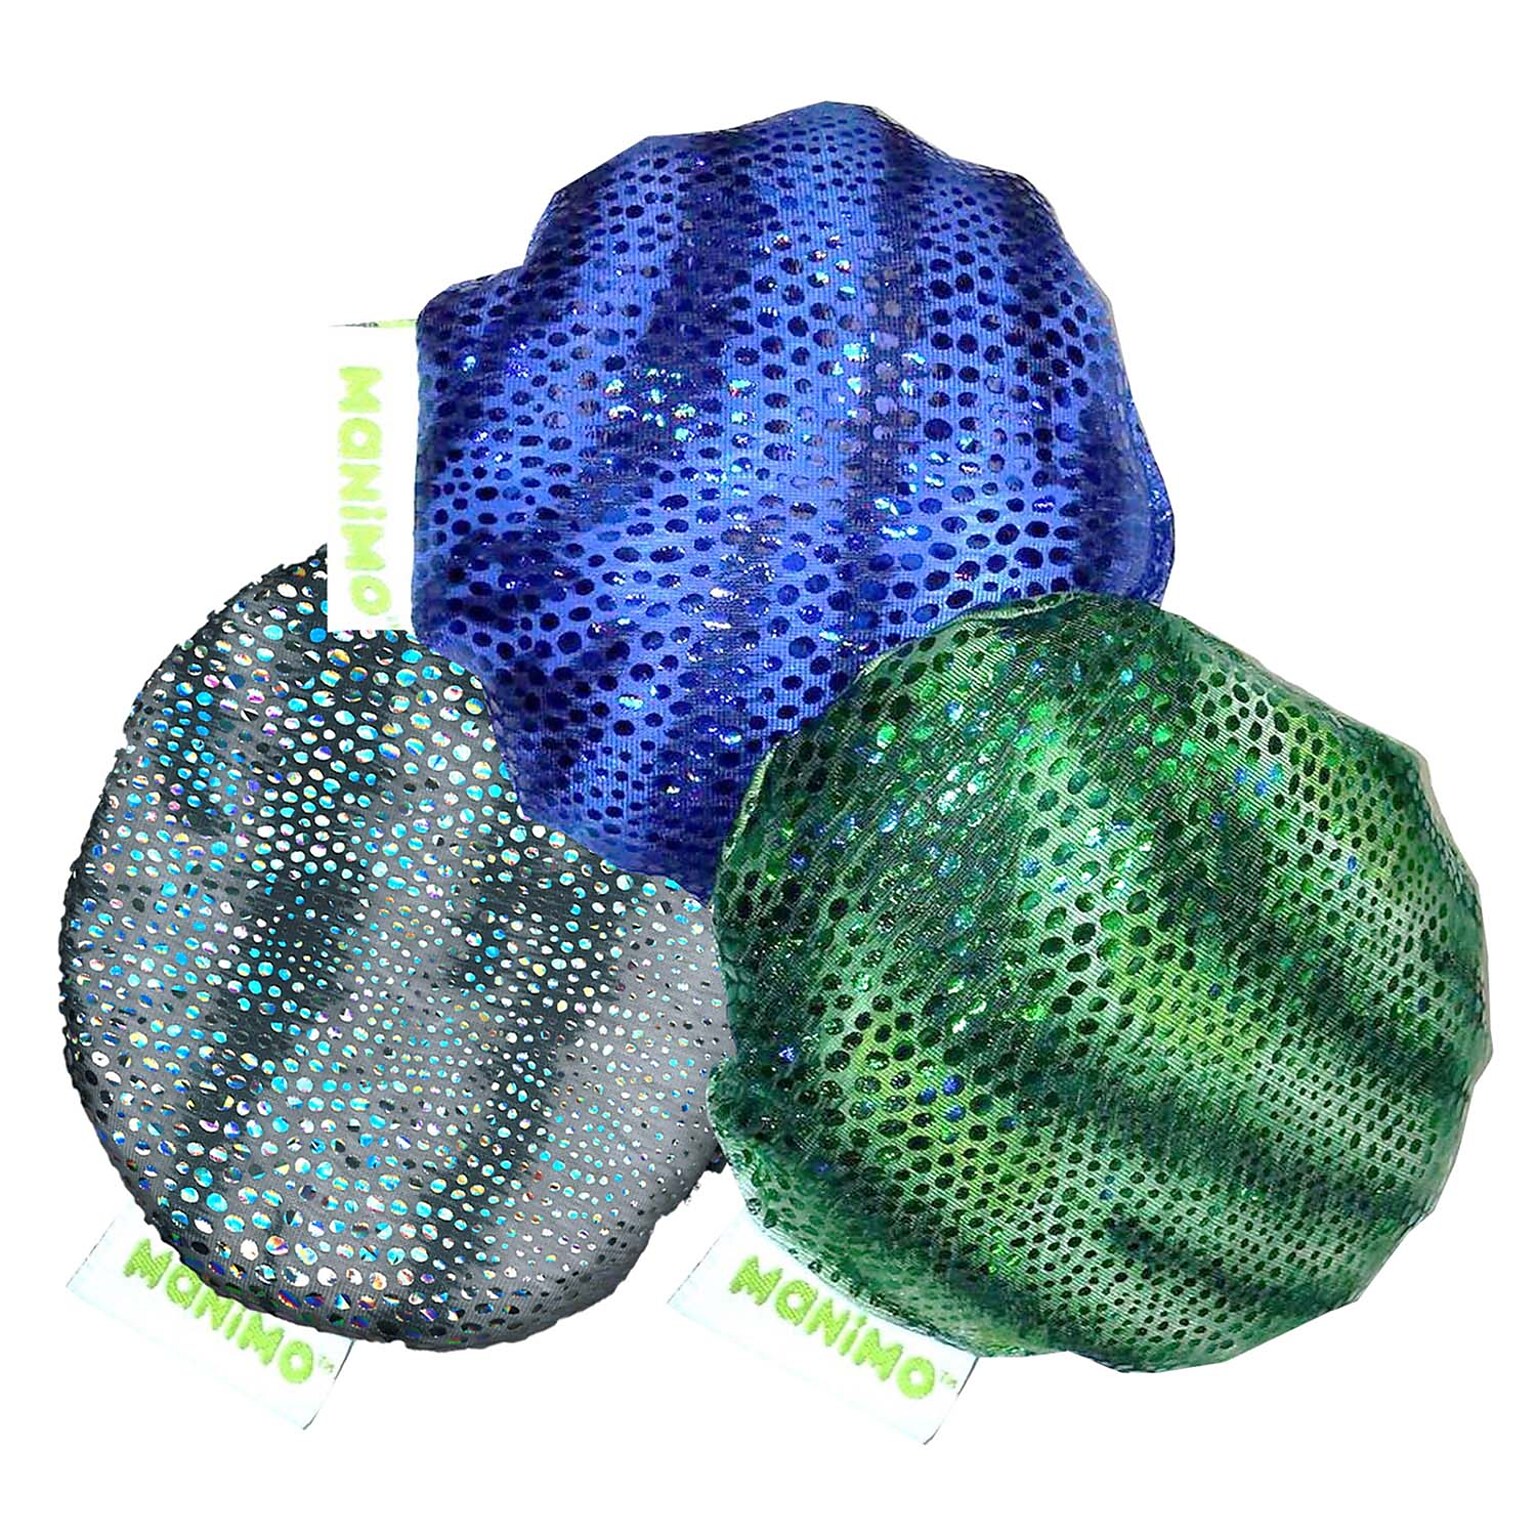 Manimo Full Moon Ball, Pack of 3 (MNO0906-3)